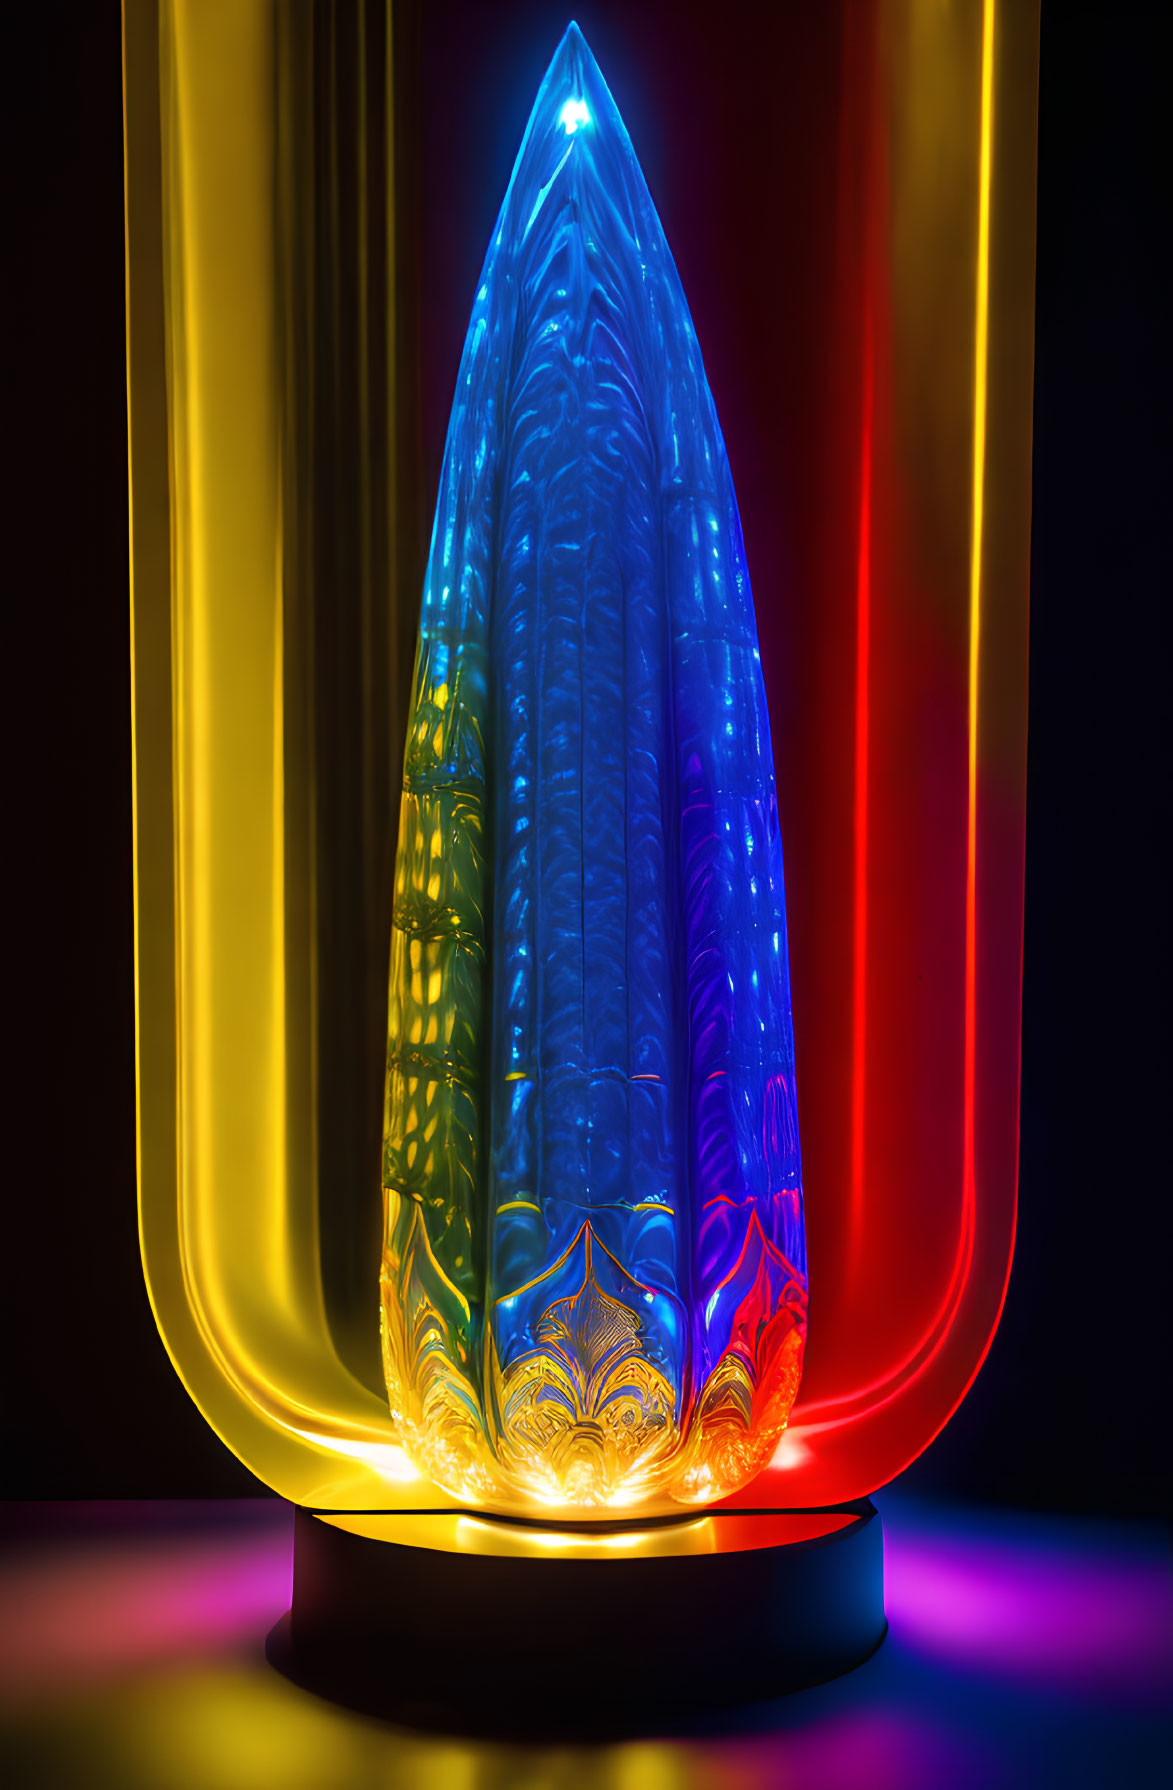 Vibrant Crystal Tower in Translucent Teardrop Shell on Black Background